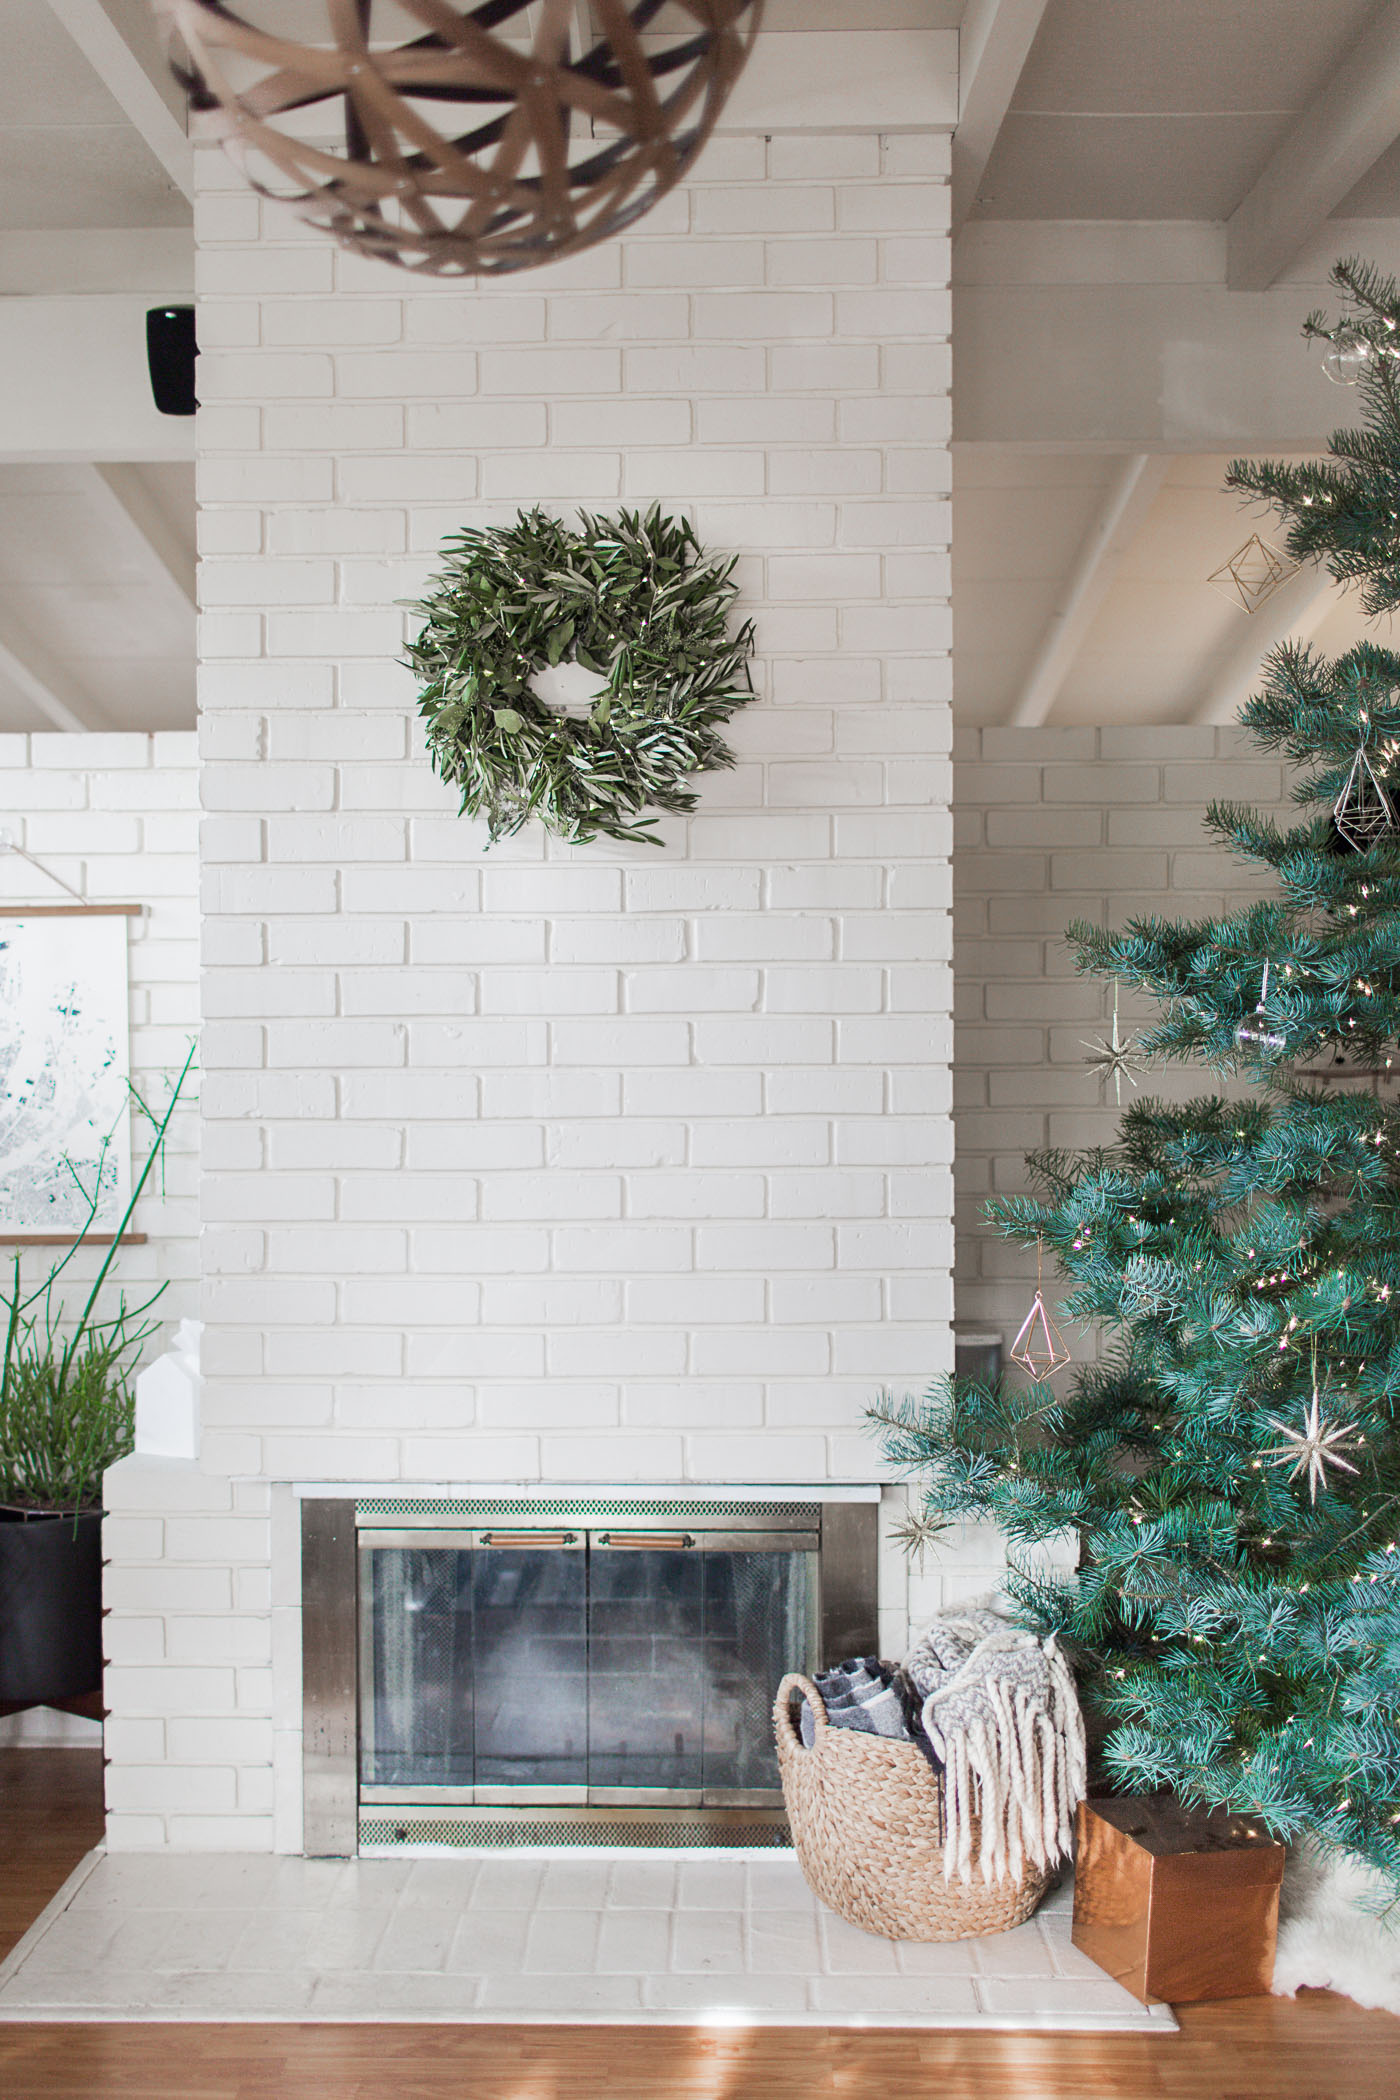 Tips to decorate with live plants during the Holiday season.